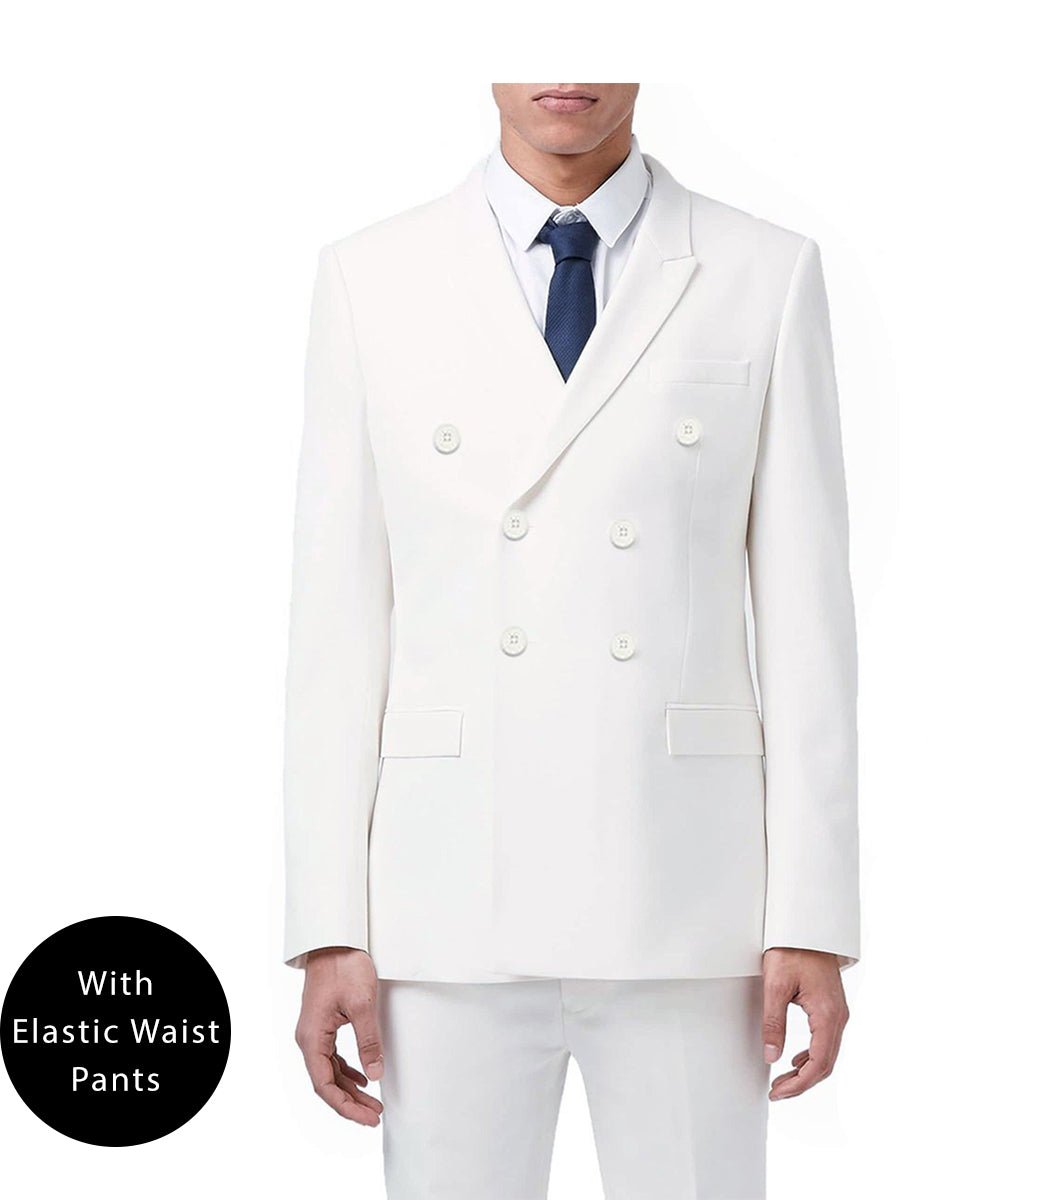 White Regular Fit Double Breasted 2 Piece Suit with Flexible Elastic Waistband